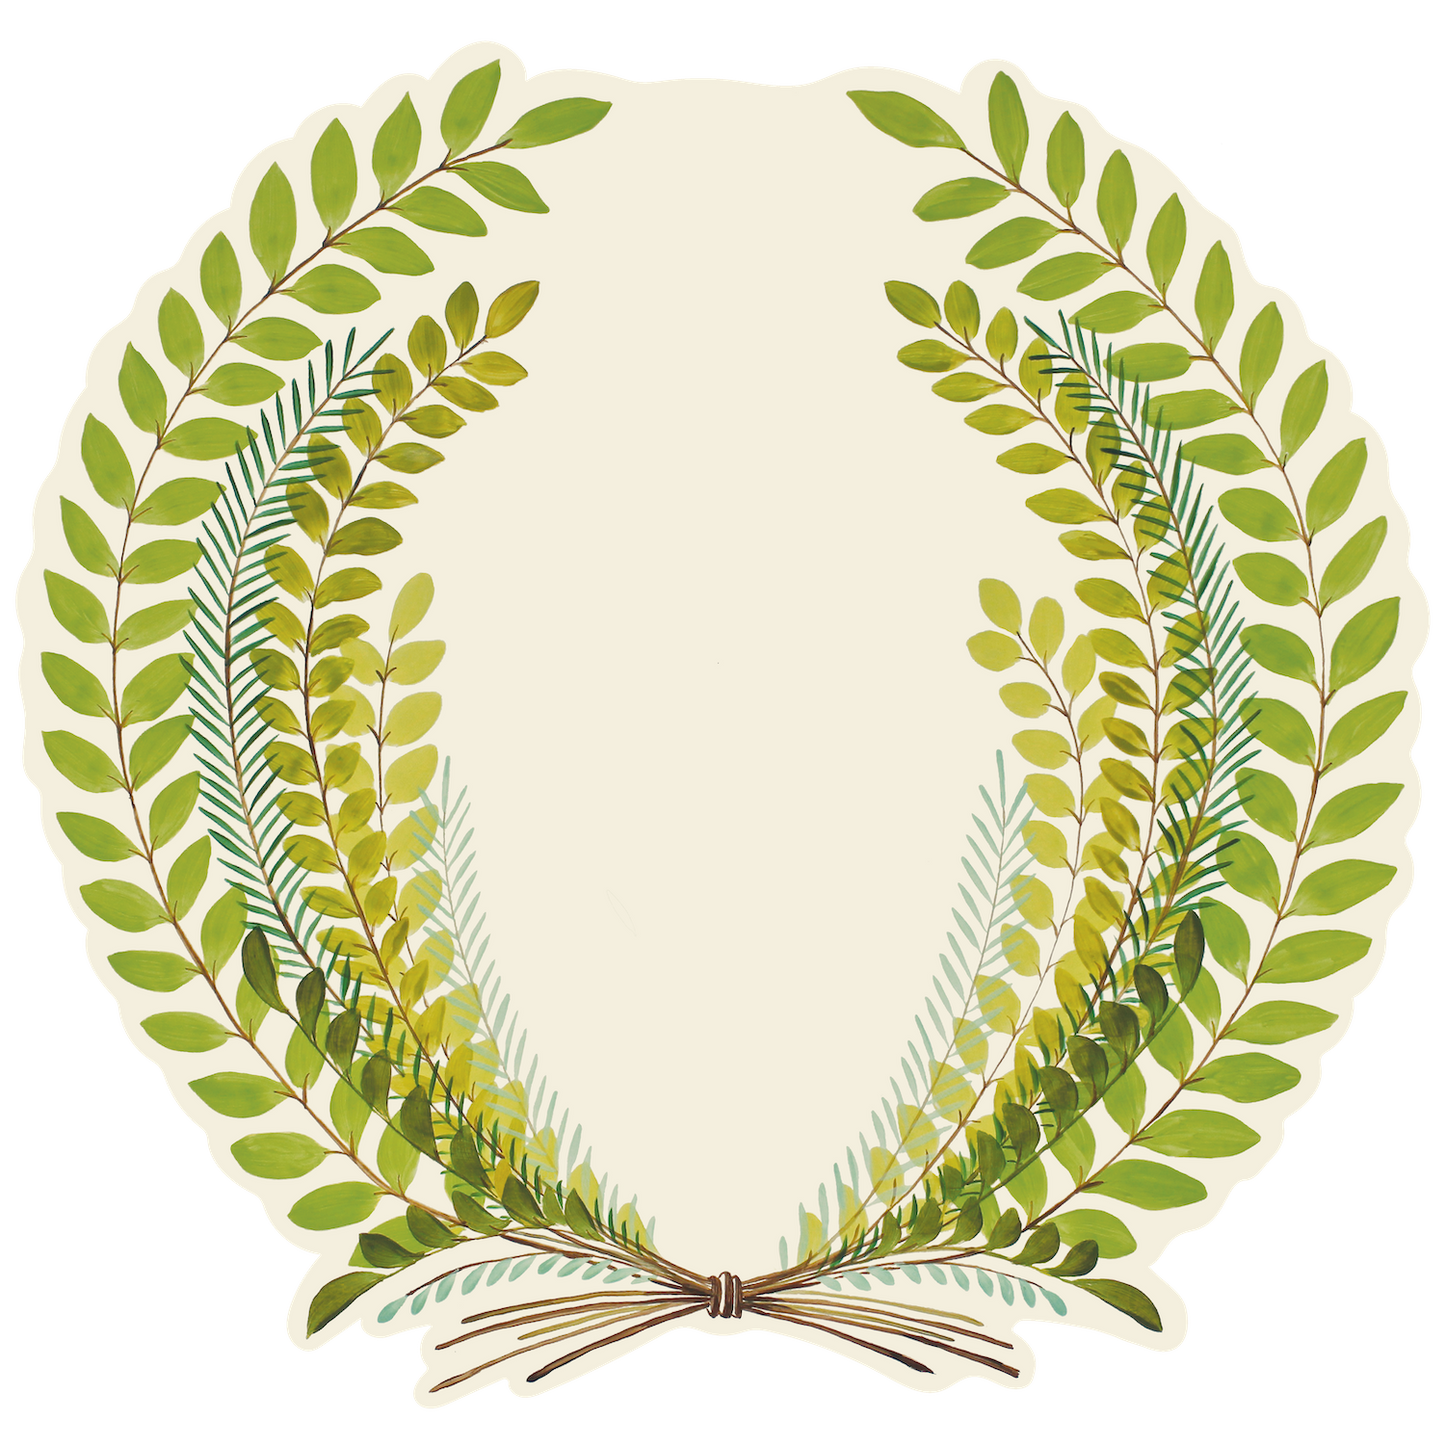 The Seedling Wreath Placemat frames the plate with its' gentle scalloped edge